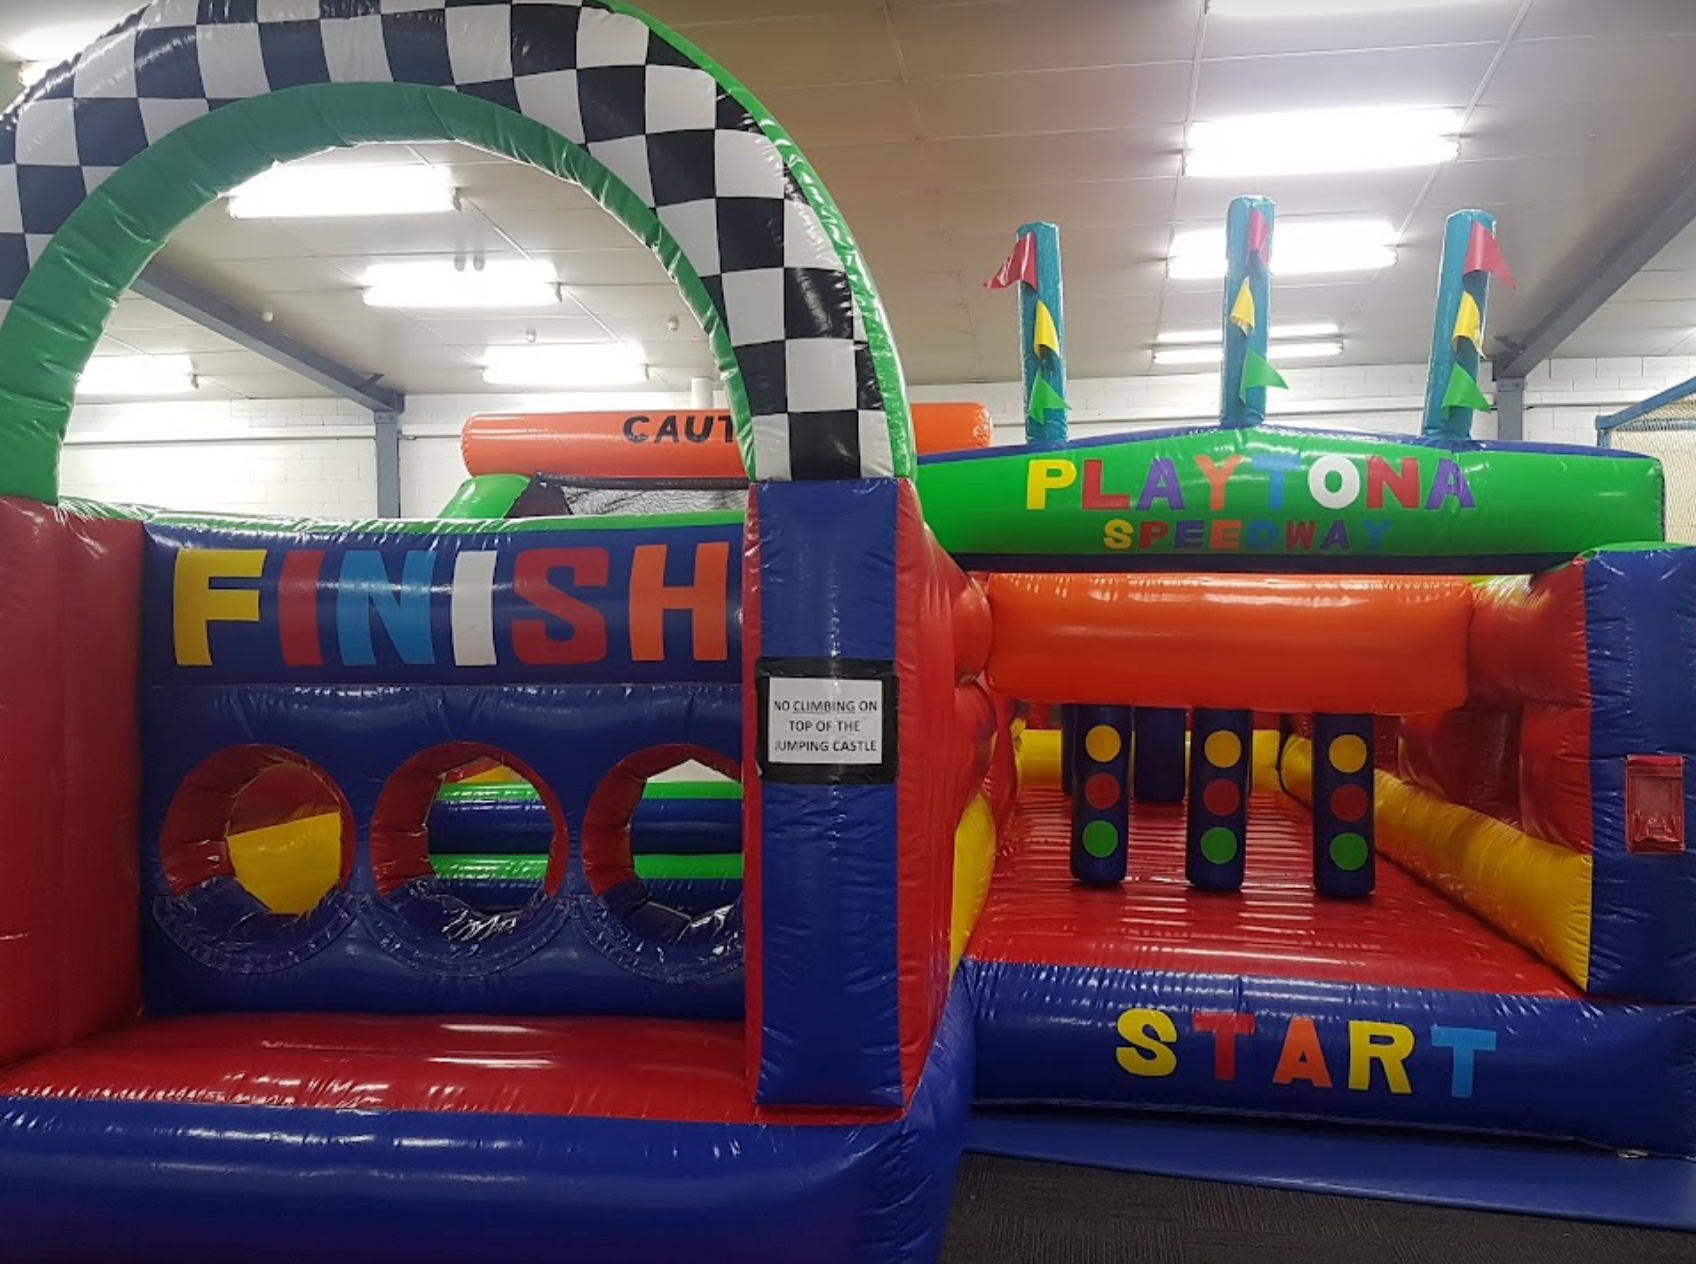 Kid Factory Indoor Play Centre and Cafe (Dingley Village)